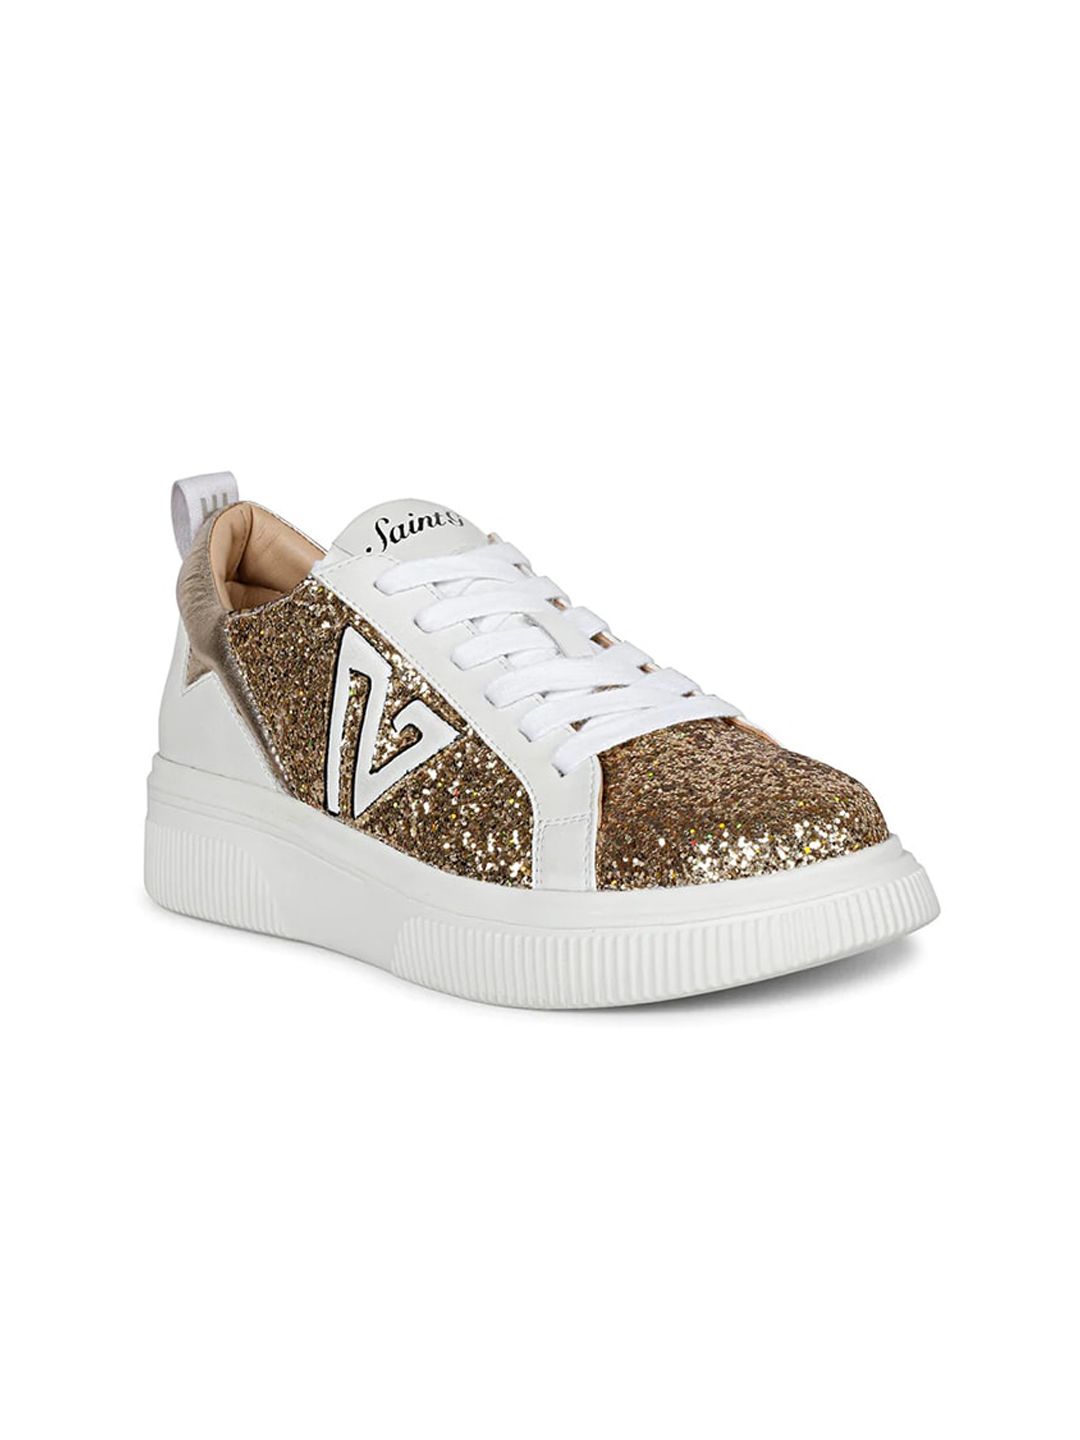 Saint G Women Woven Design Lace-Up Leather Sneakers Price in India